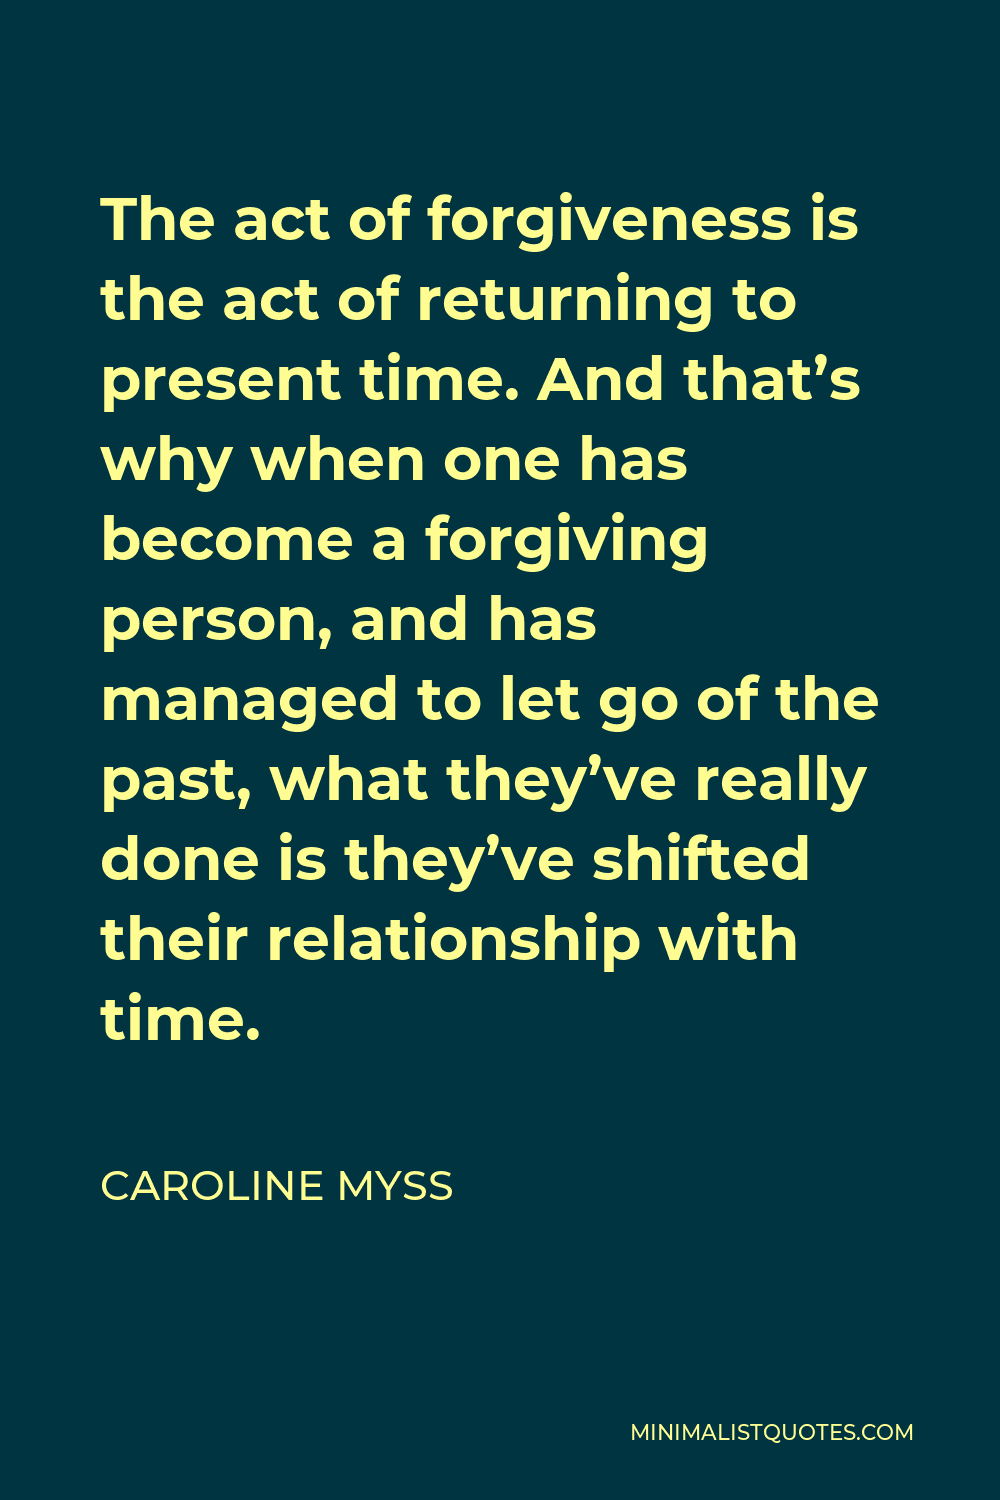 Caroline Myss Quote - The act of forgiveness is the act of returning to present time. And that’s why when one has become a forgiving person, and has managed to let go of the past, what they’ve really done is they’ve shifted their relationship with time.